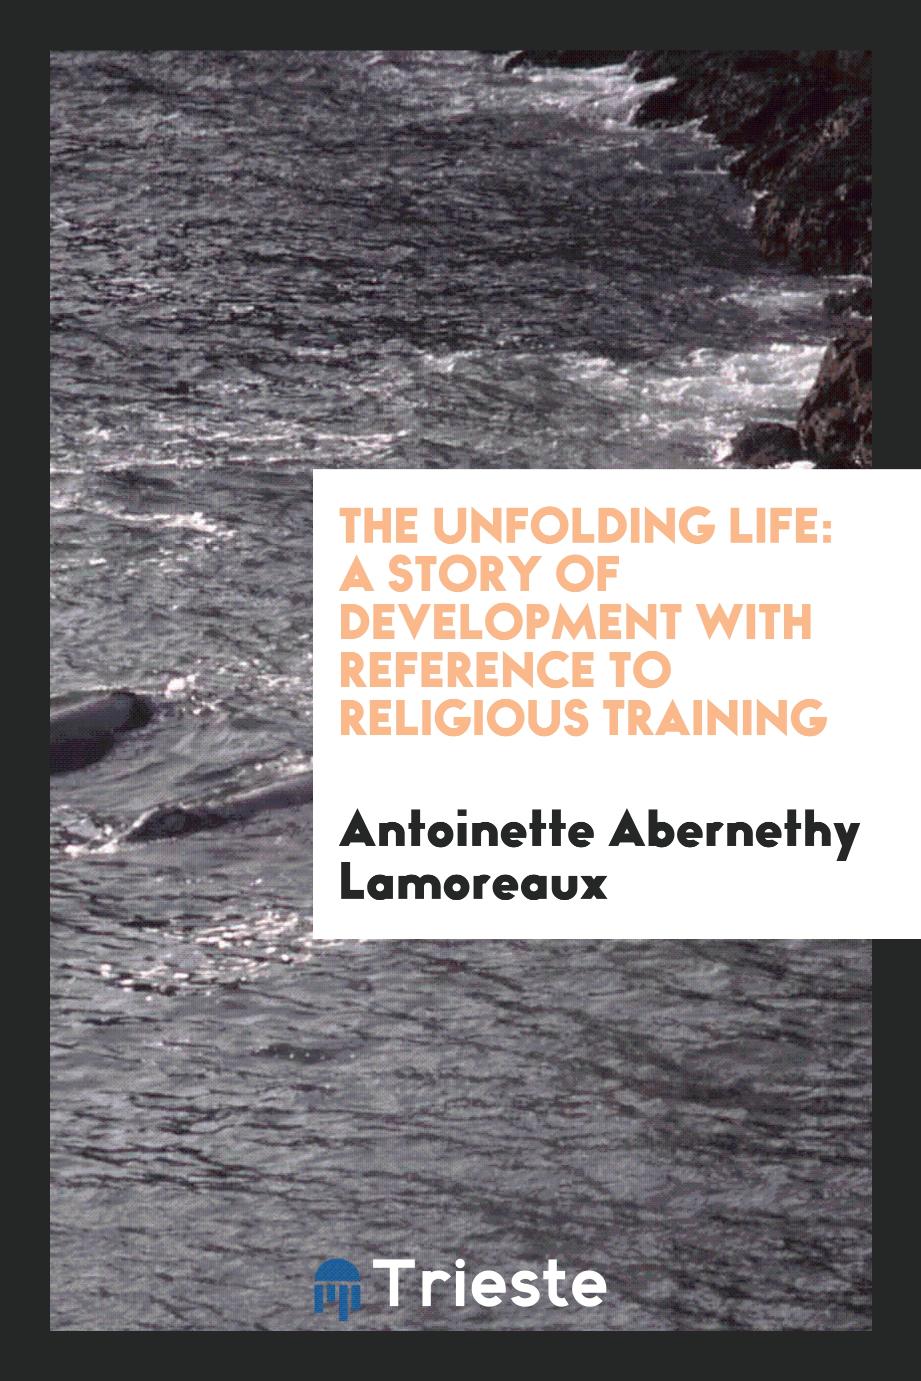 The Unfolding Life: A Story of Development with Reference to Religious Training